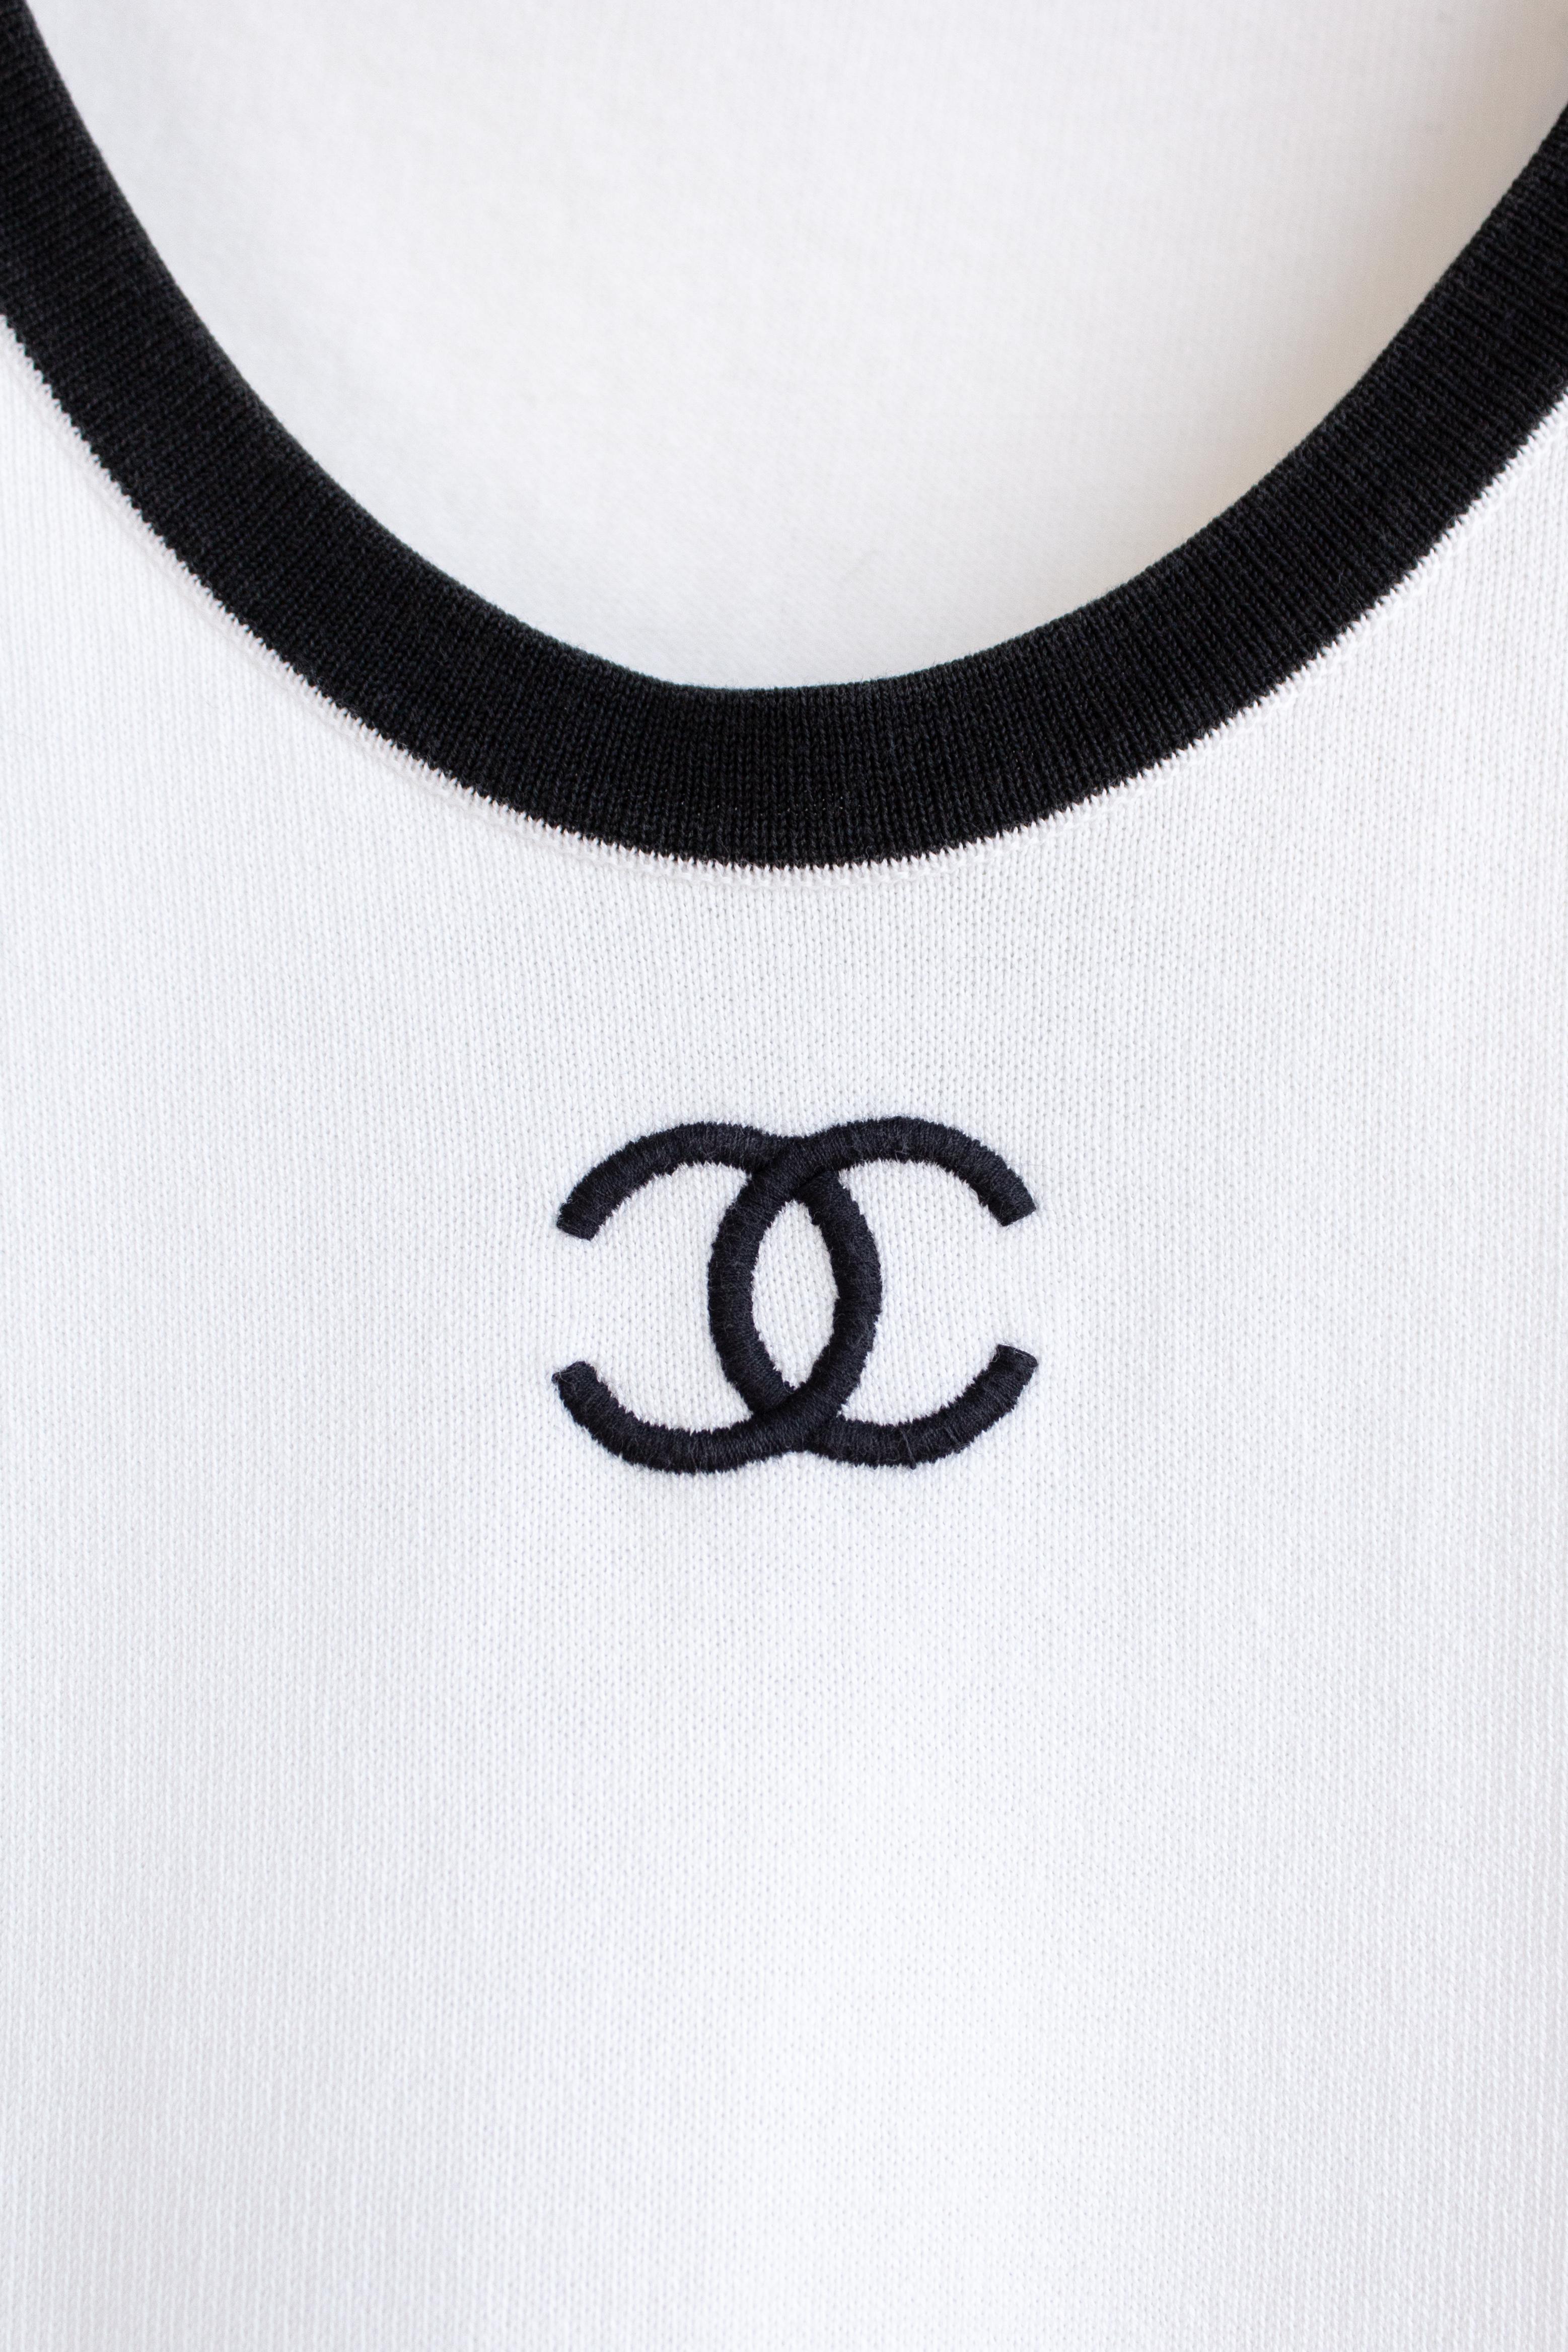 Chanel Vintage S/S1994 White Black Trim CC Logo 94P Cotton T-Shirt Top In Good Condition In Jersey City, NJ